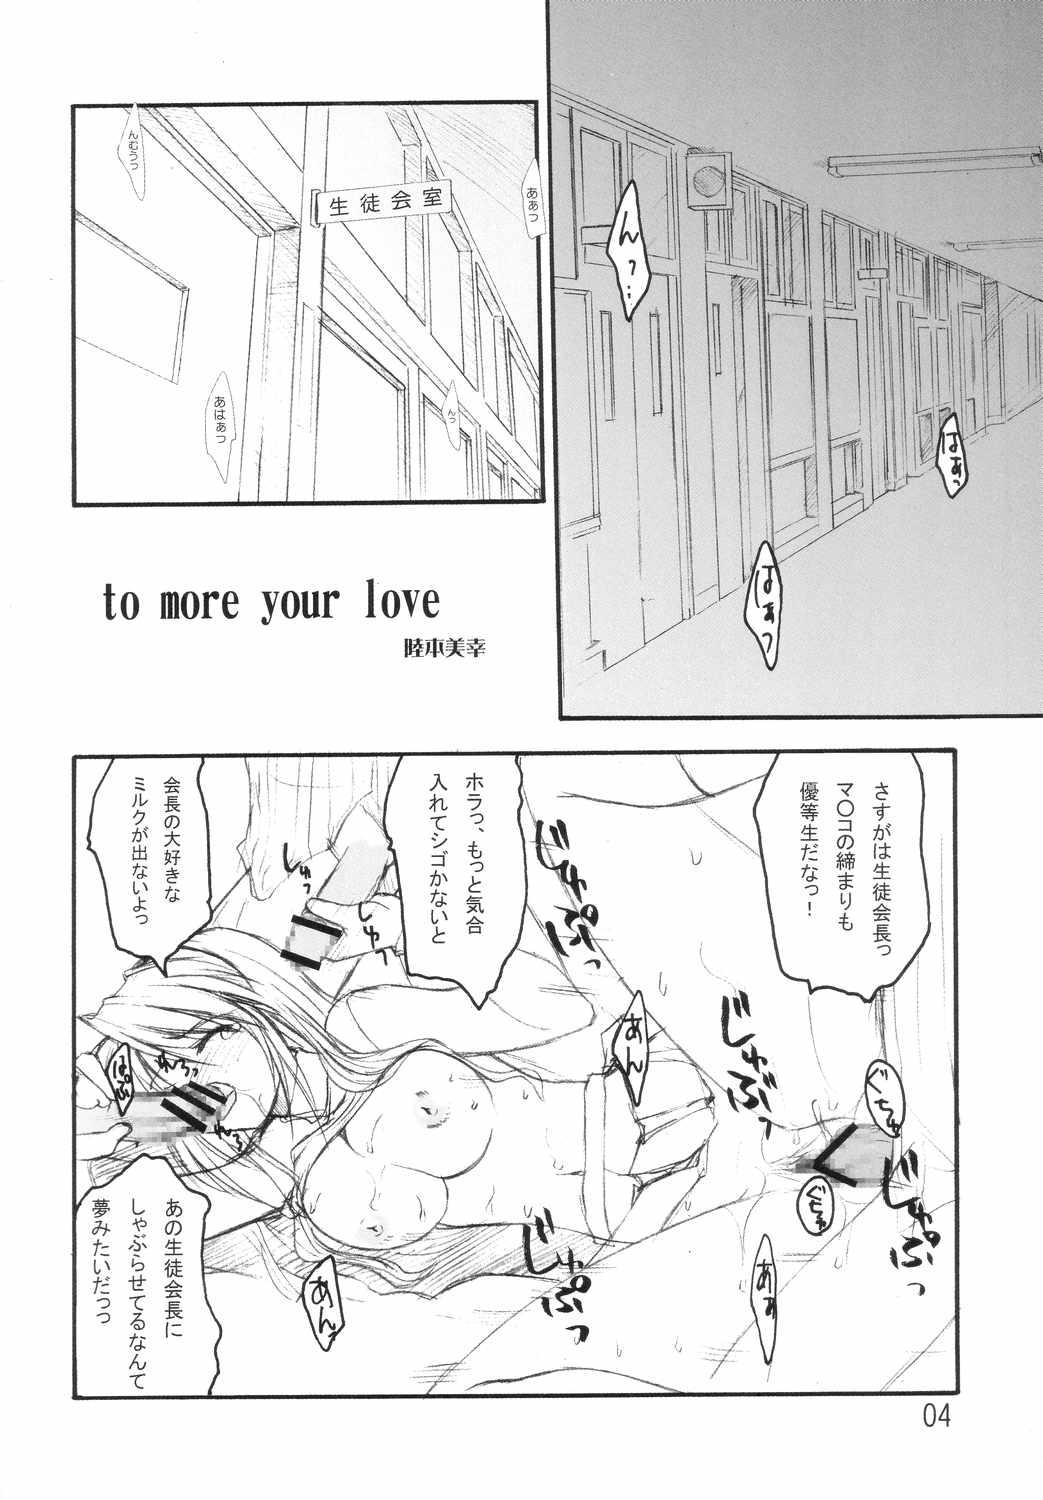 Adorable NEXT plus - Clannad Candid - Page 3